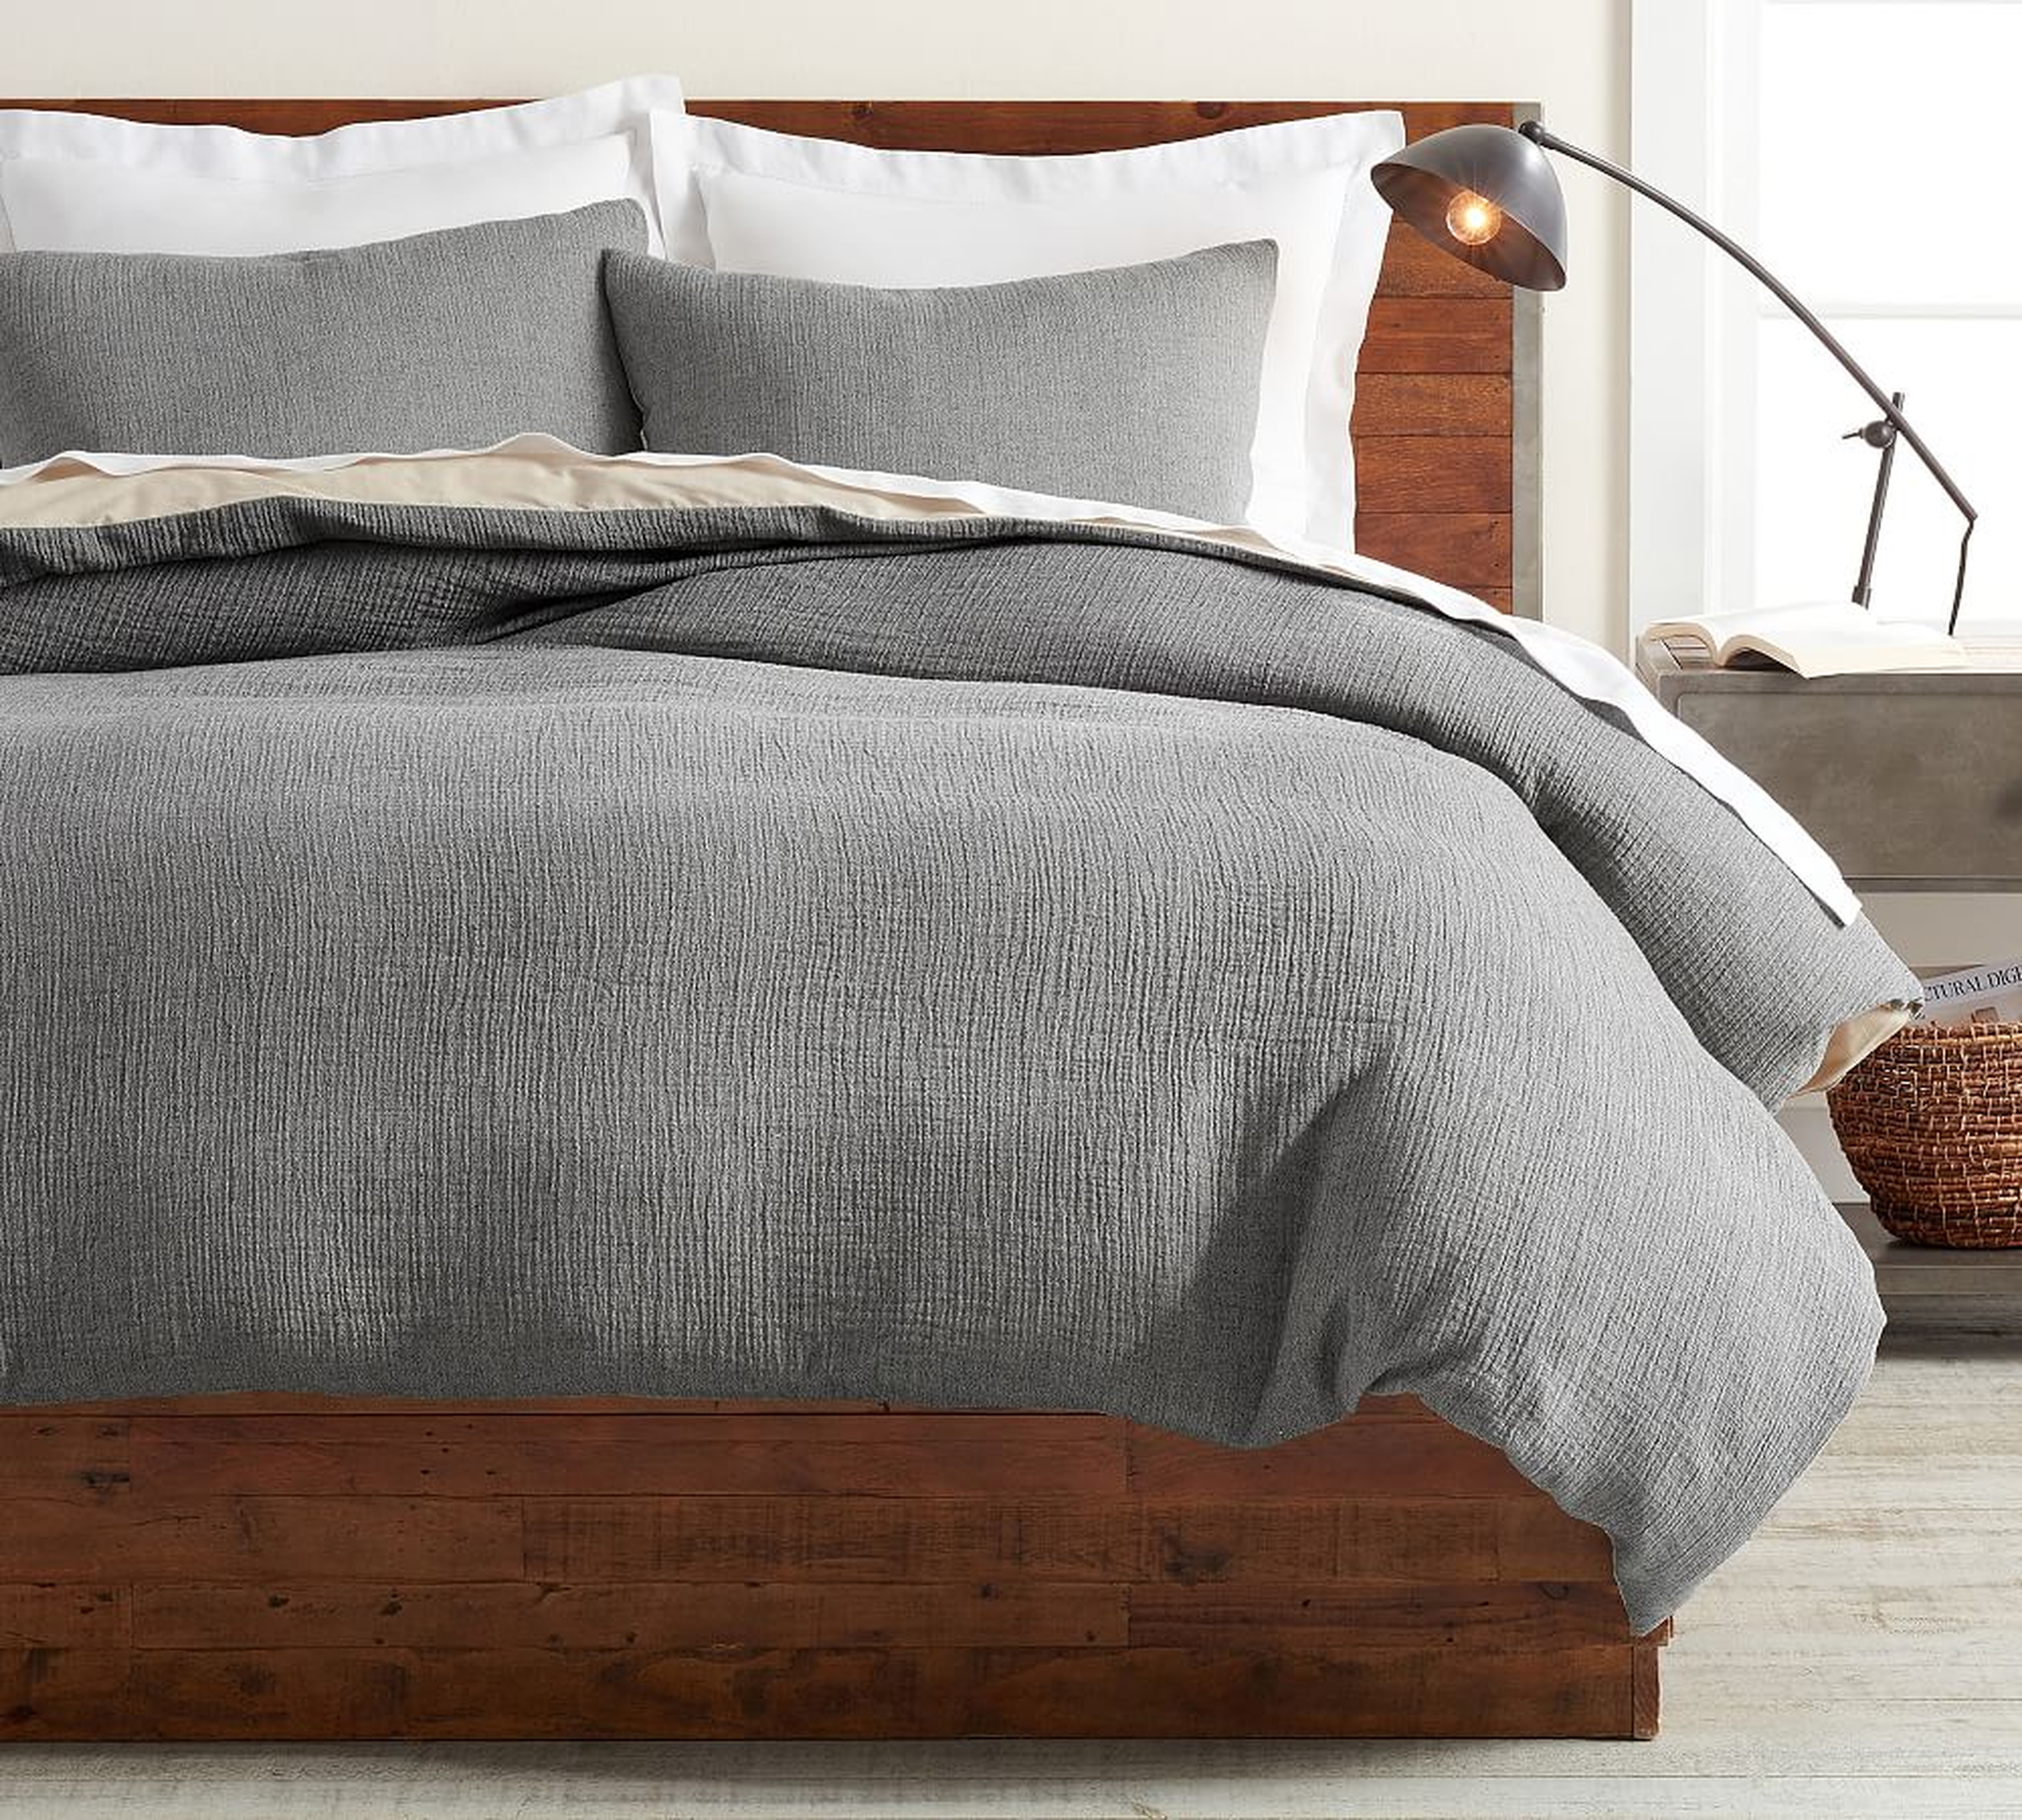 Charcoal Soft Cotton Duvet Cover, King/Cal. King - Pottery Barn